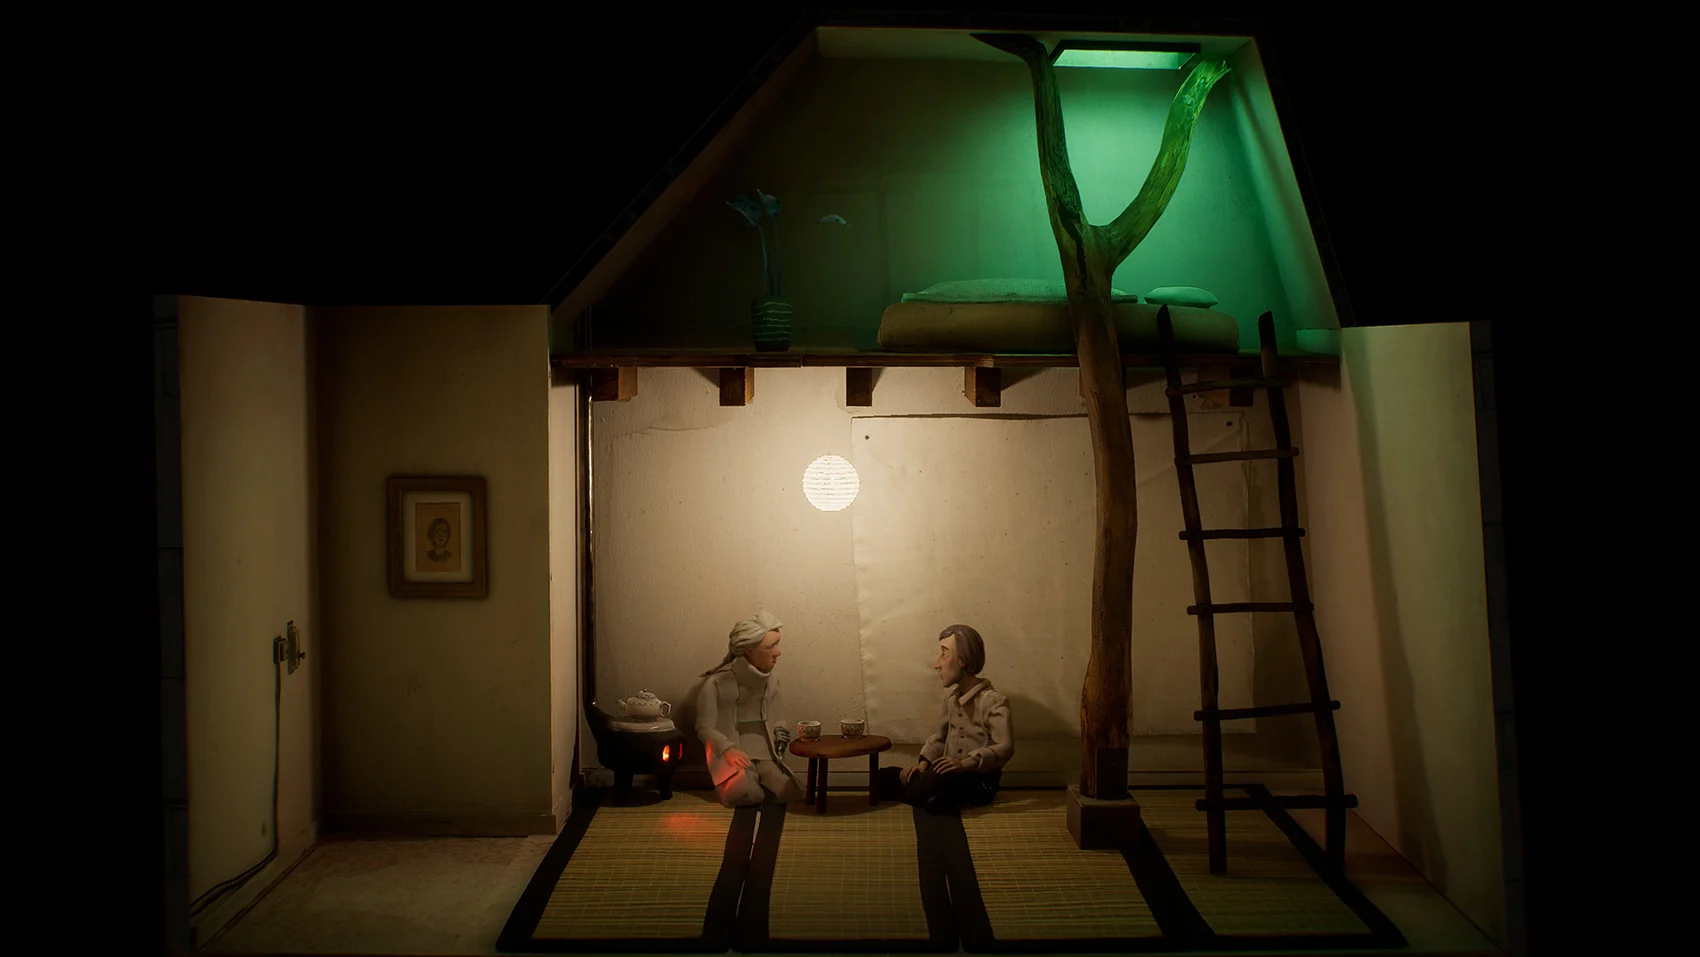 A still from the handmade video game Harold Halibut. The clip shows a man and a woman talking while sitting together on the floor of a dimly lit room.